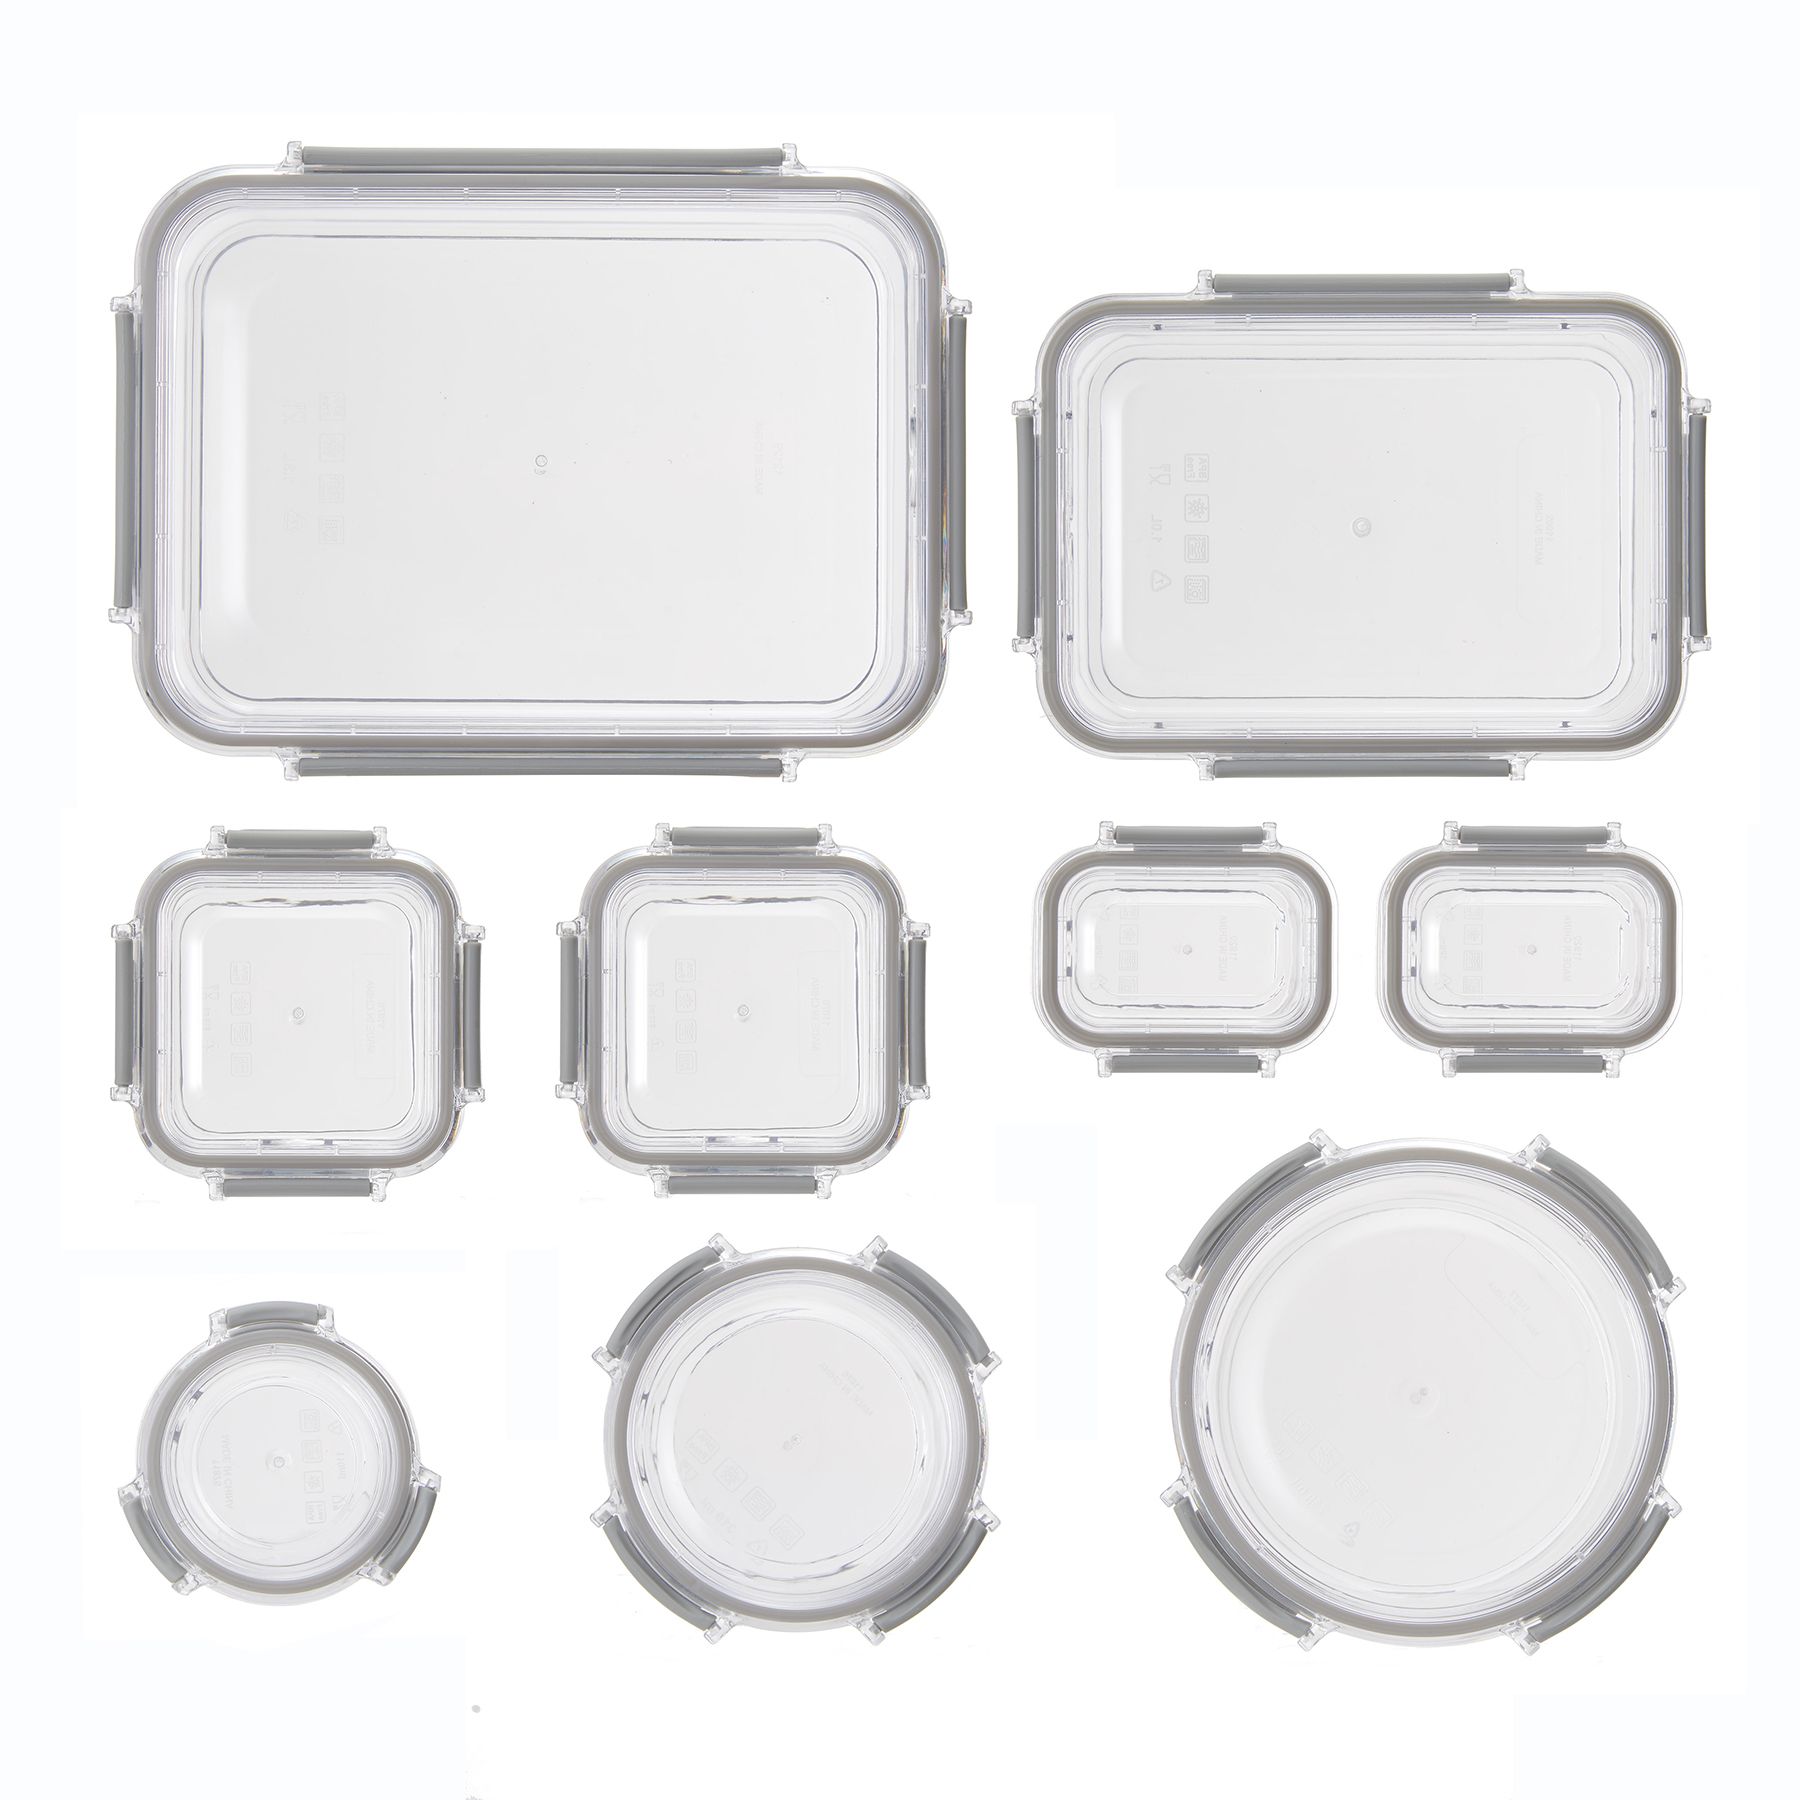 Mainstays Tritan Variety Set of 9 Food Storage Containers with Light Grey Clasps (18 Pc in Total) - image 3 of 5